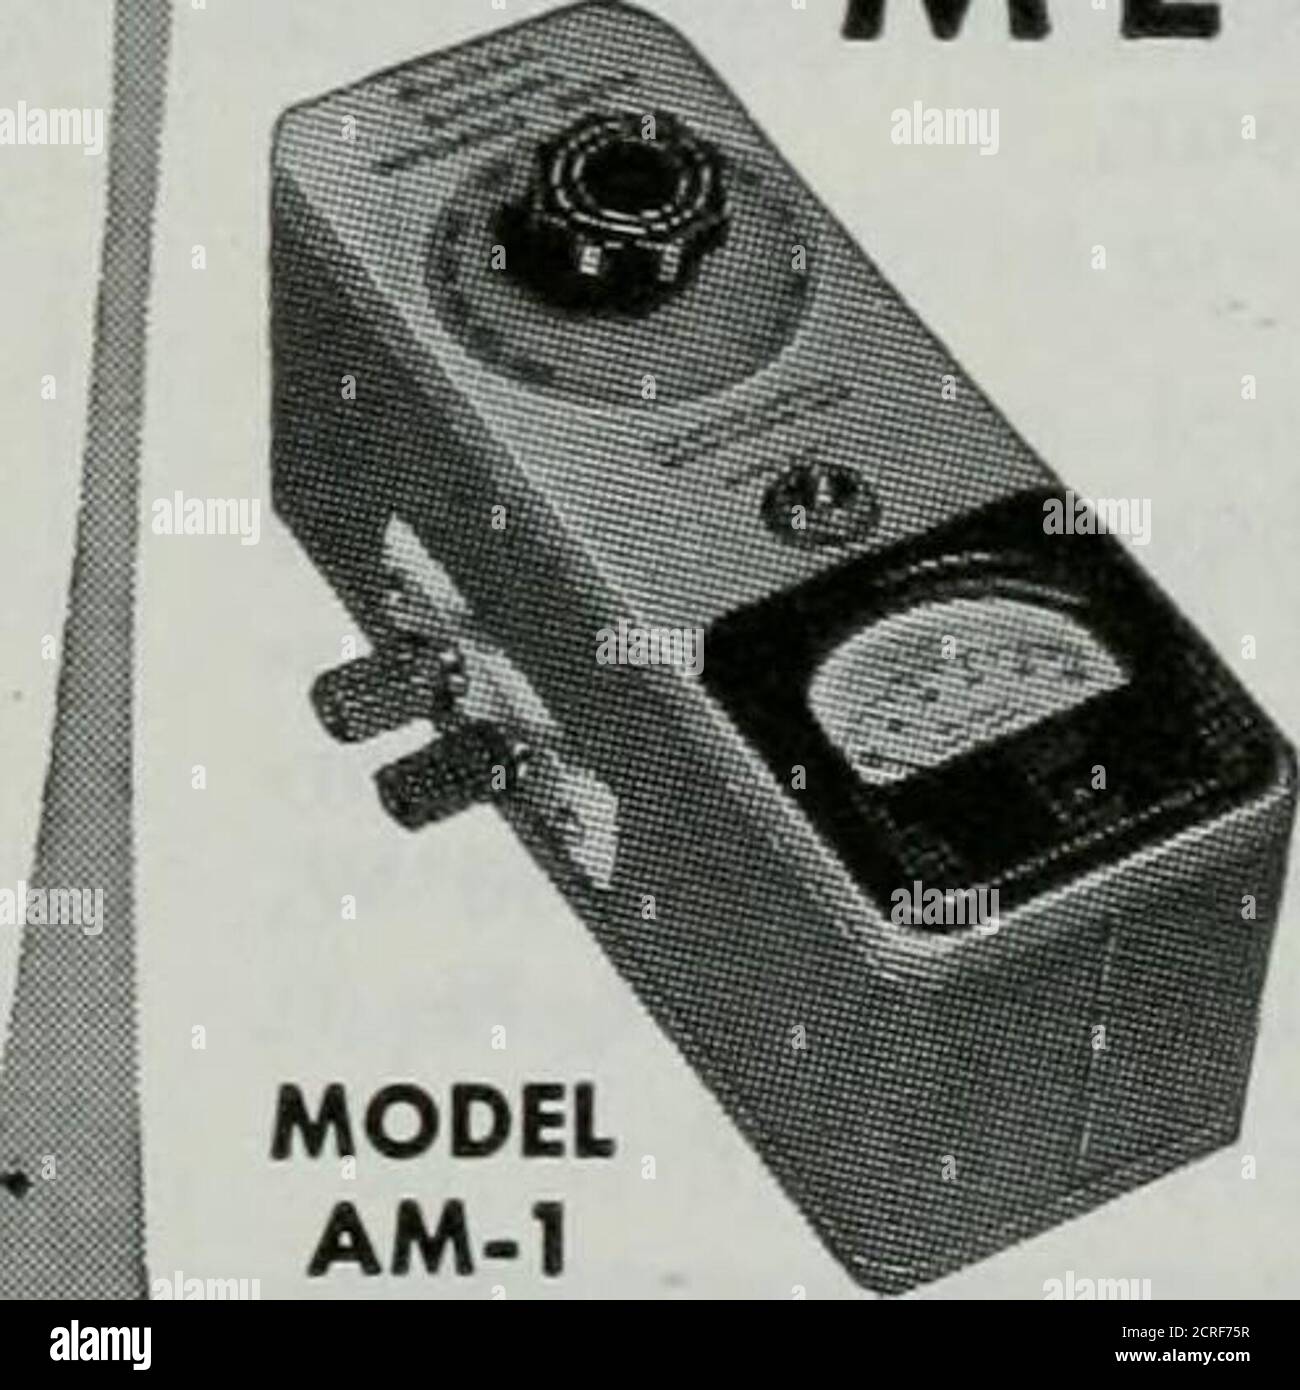 https://c8.alamy.com/comp/2CRF75R/qst-model-ac-1-1450-shpg-wf4-lbs-lecitait-antenna-impedance-meter-kit-use-the-model-am-1-in-con-jimction-with-a-signal-sourcefor-measuring-antenna-im-pedance-line-matching-pur-poses-adjustment-of-beamand-mobile-antennas-andto-insure-proper-impedancematch-for-optimum-overallsystem-operation-will-dou-ble-also-as-a-phone-monitoror-relative-field-strengthindicator-1-c-a-shpg-wt-100-jua-meter-employed-i-j-2-lbs-covers-the-range-from-0-to-to-600-ohms-cabinet-is-only-7-long-2-wide-and-3m-deep-an-instrument-of-many-uses-for-the-amateur-iittie-macdoes-a-big-job!-pa-2CRF75R.jpg